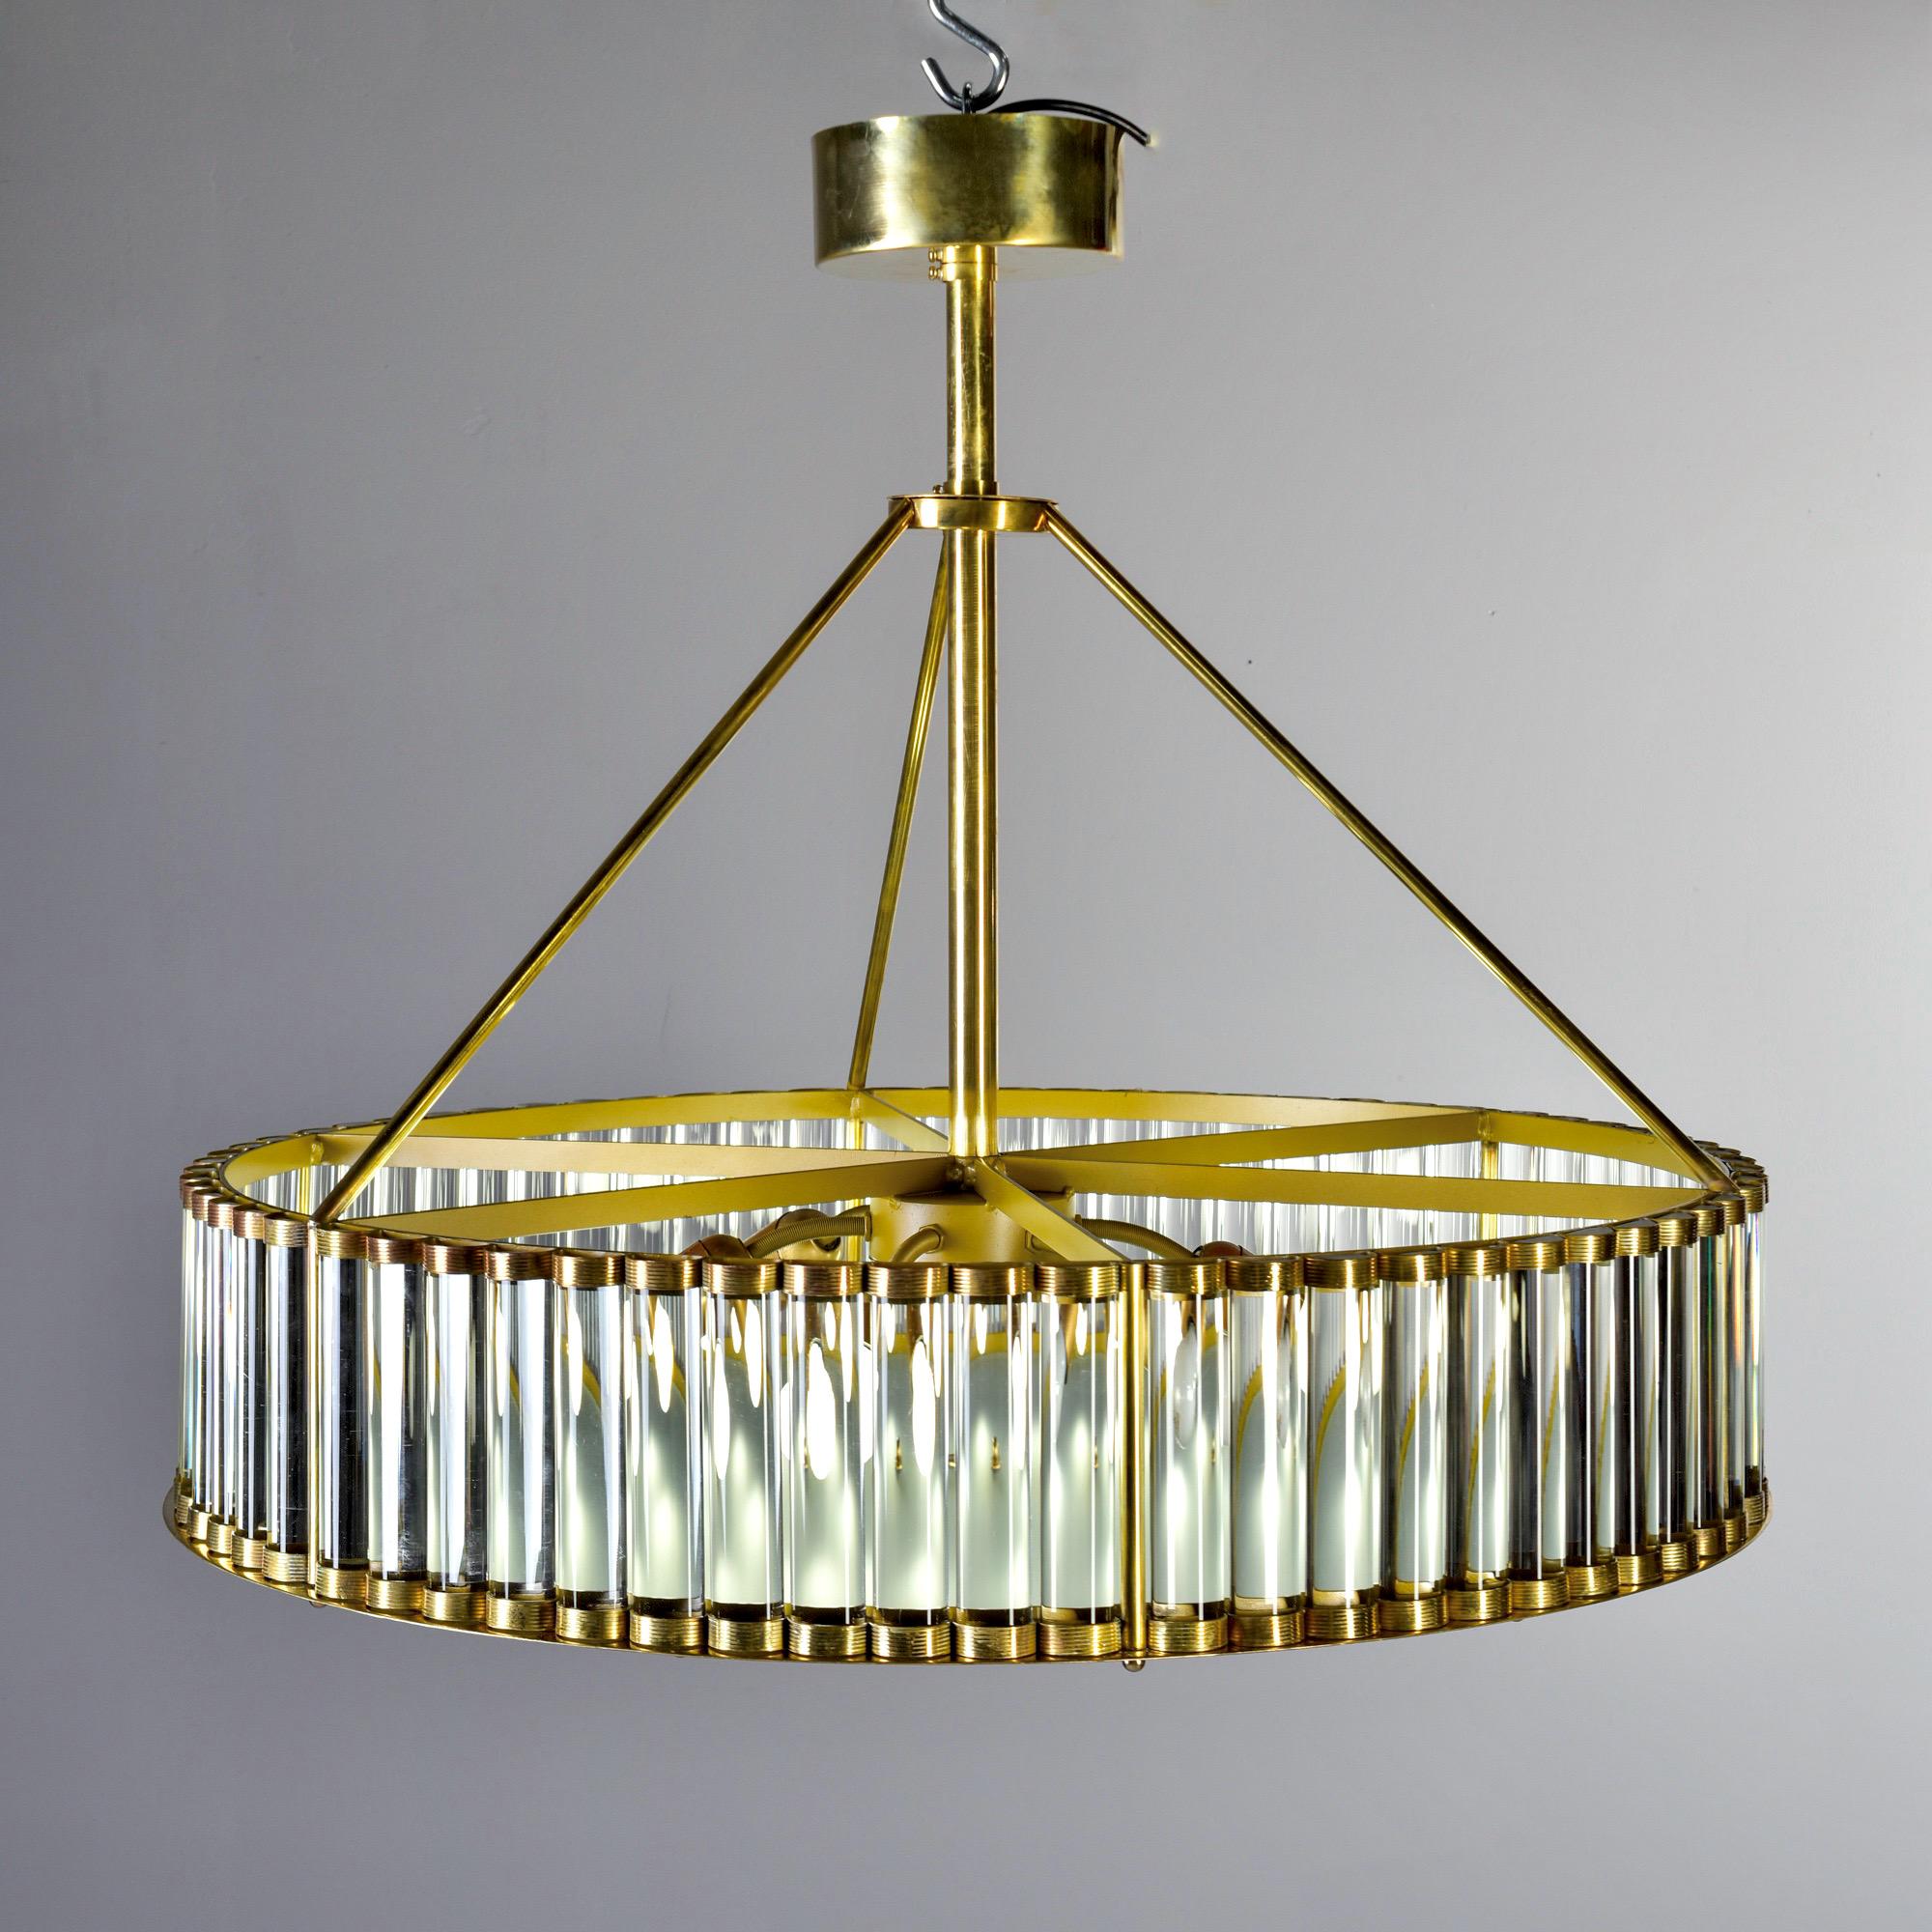 Italian Deco Style Fixture with Polished Brass and Glass Rod Frame 1